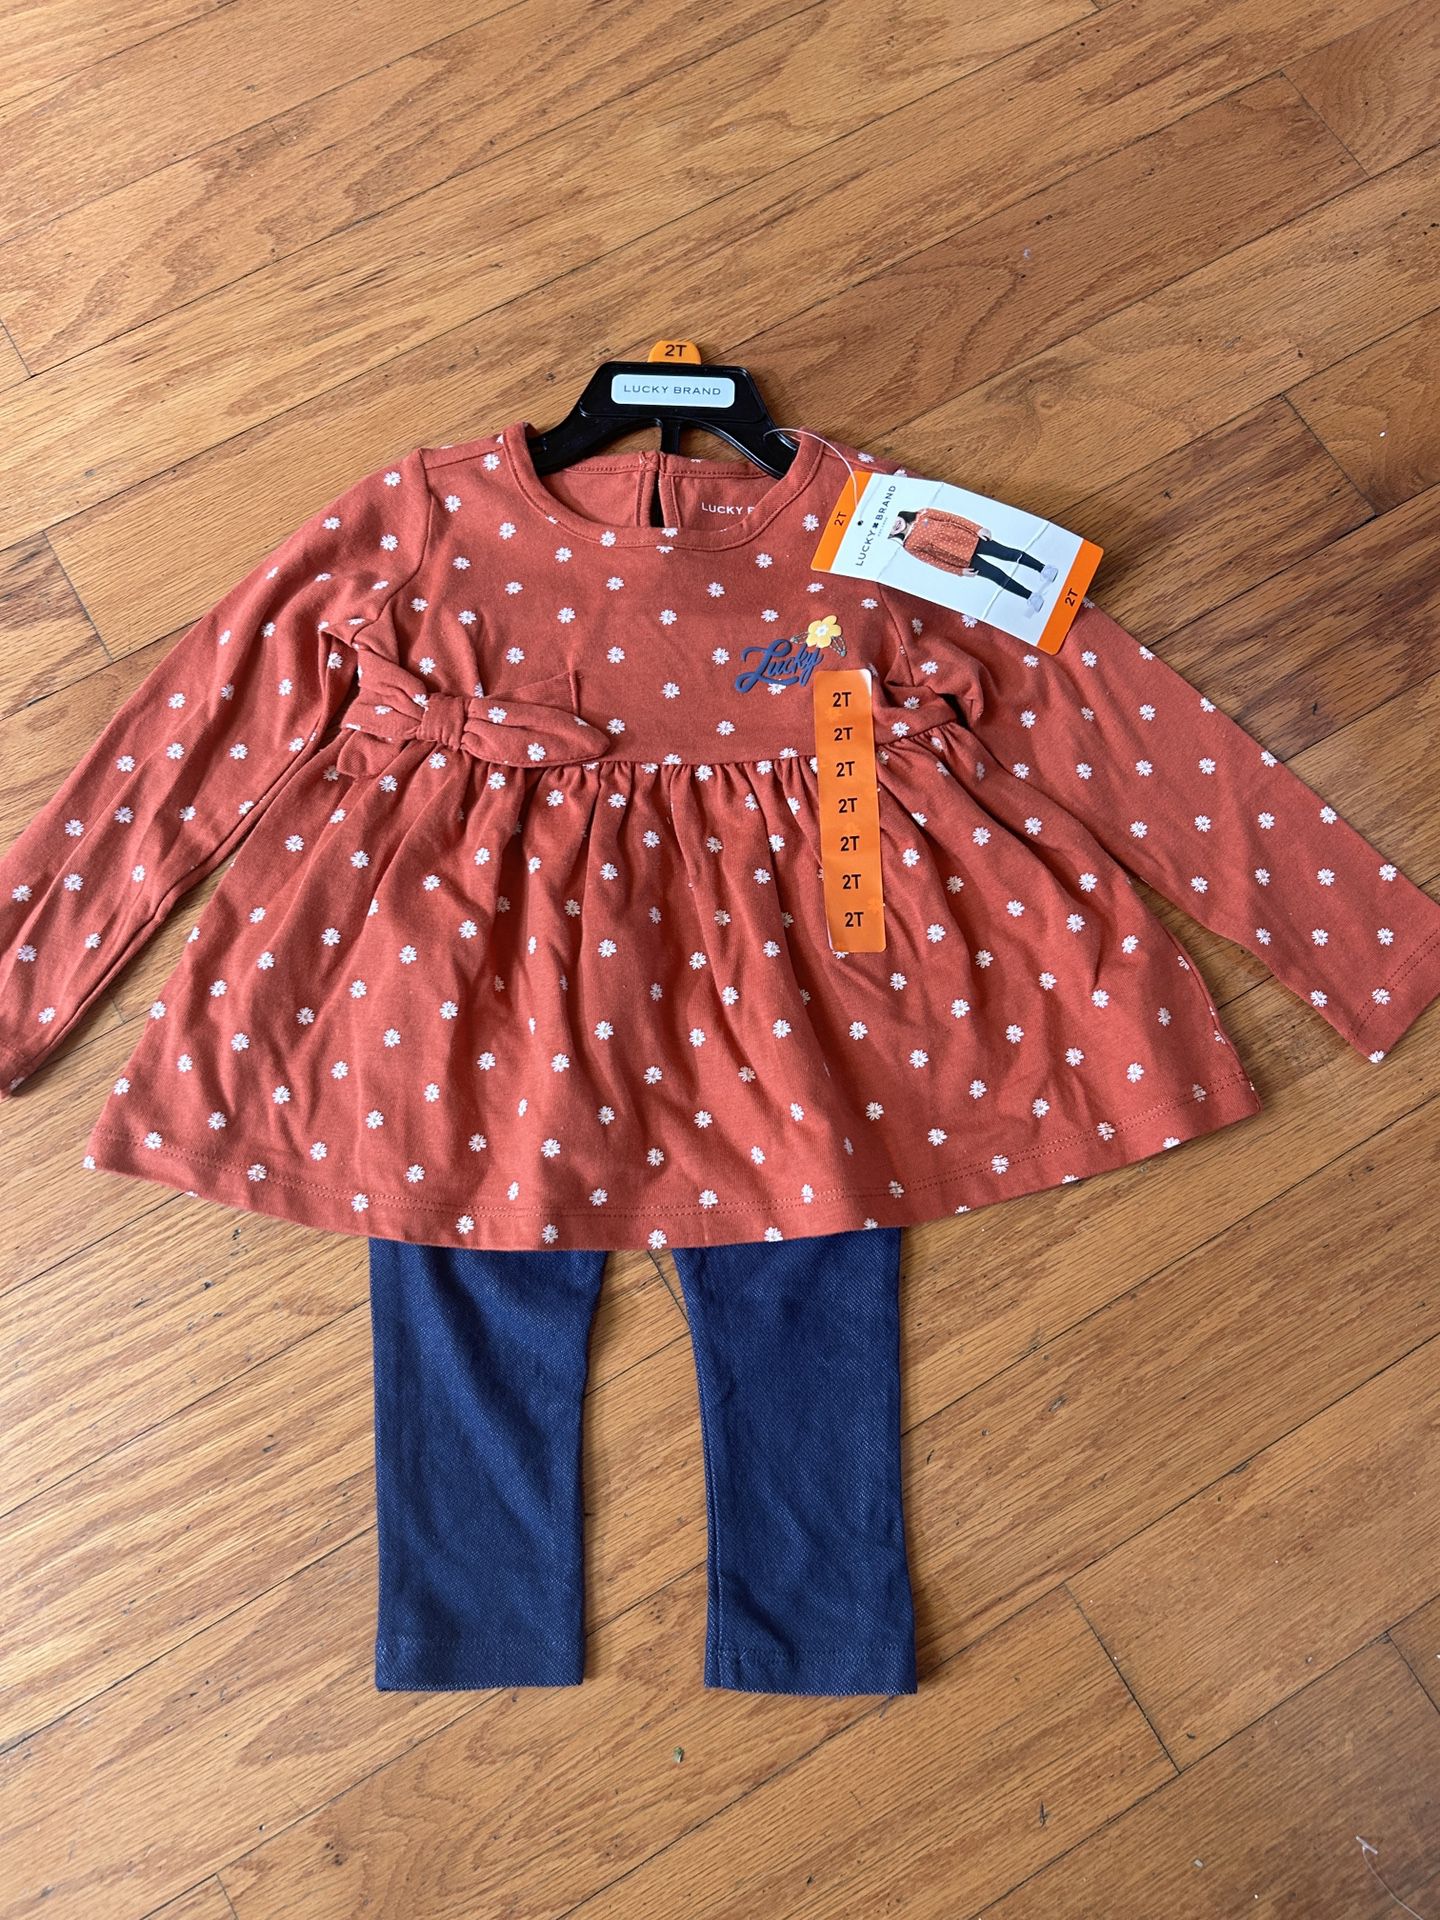 NWT Lucky Brand Girls  2pcs outfit set size 2T